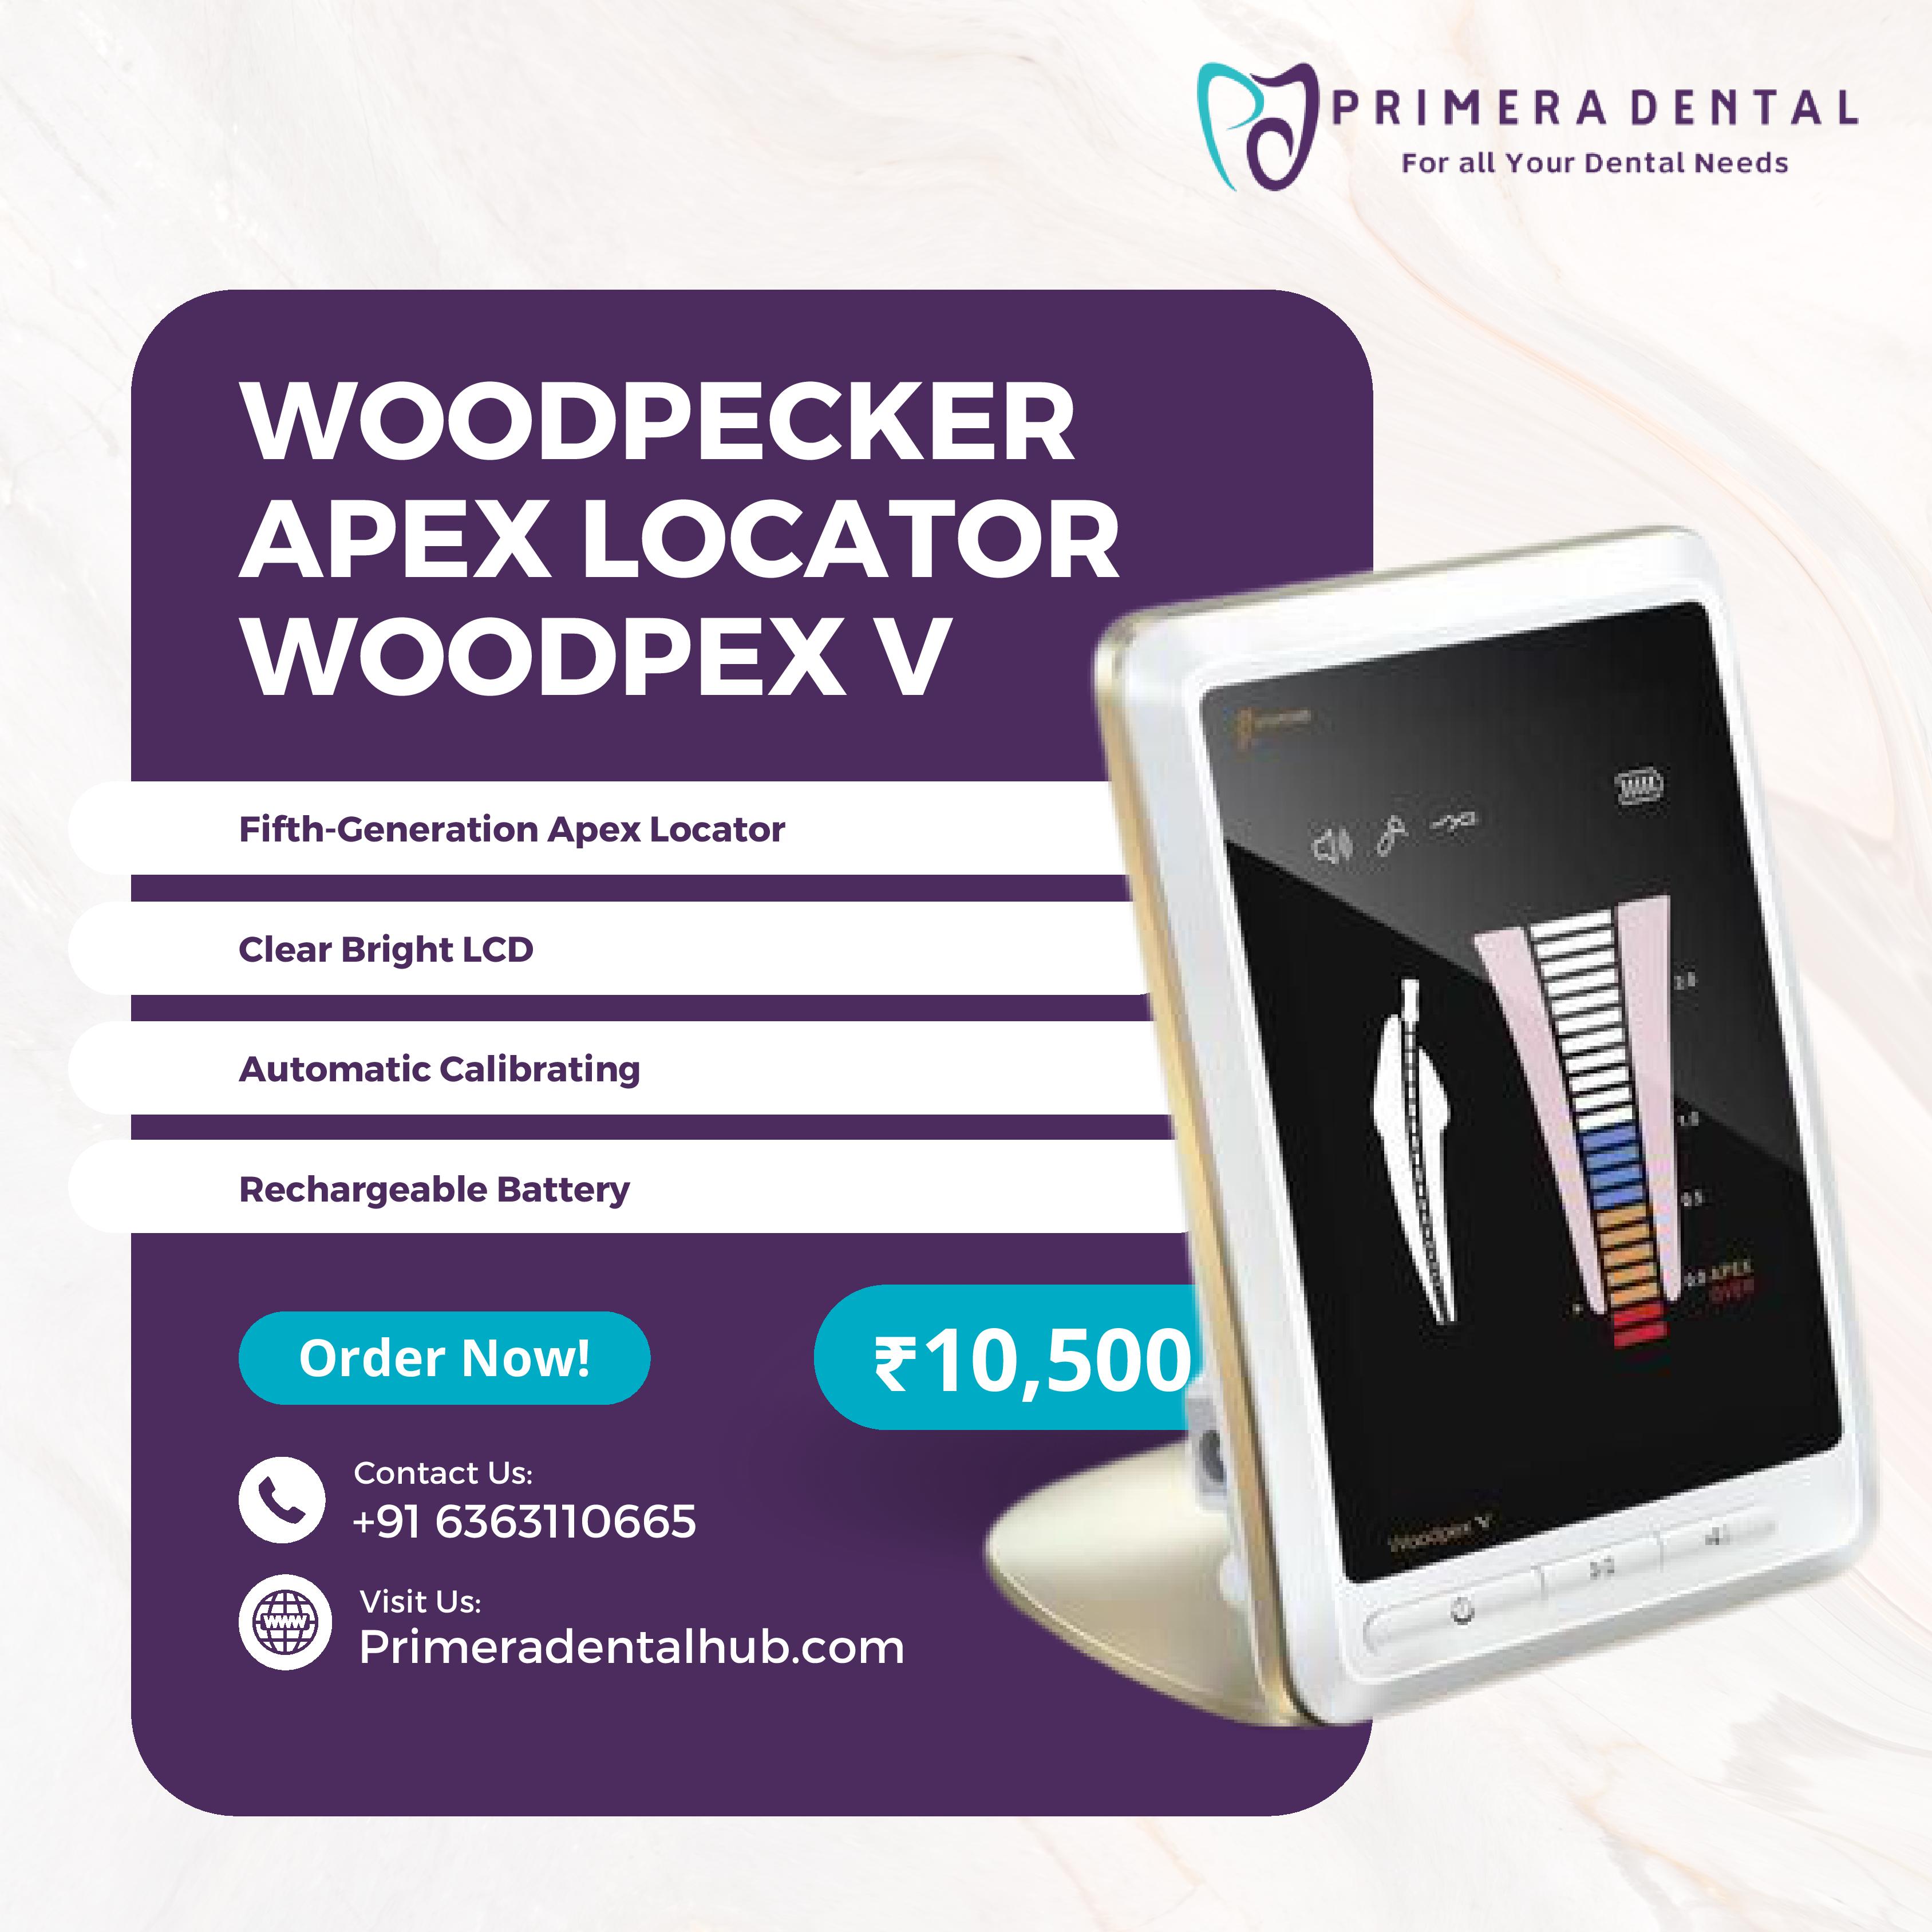 : PRIMERADENTAL
For all Your Dental Needs

   
   

  
  

WOODPECKER
APEX LOCATOR
WOODPEXV

Fifth-Generation Apex Locator

  
 
 
 
 
 
 
 

 

Clear Bright LCD

 

Automatic Calibrating

 

  
 

Rechargeable Battery

Order Now!
Contact Us:
, +91 6363110665

&@ Visit Us: , : 5
Primeradentalhub.com "